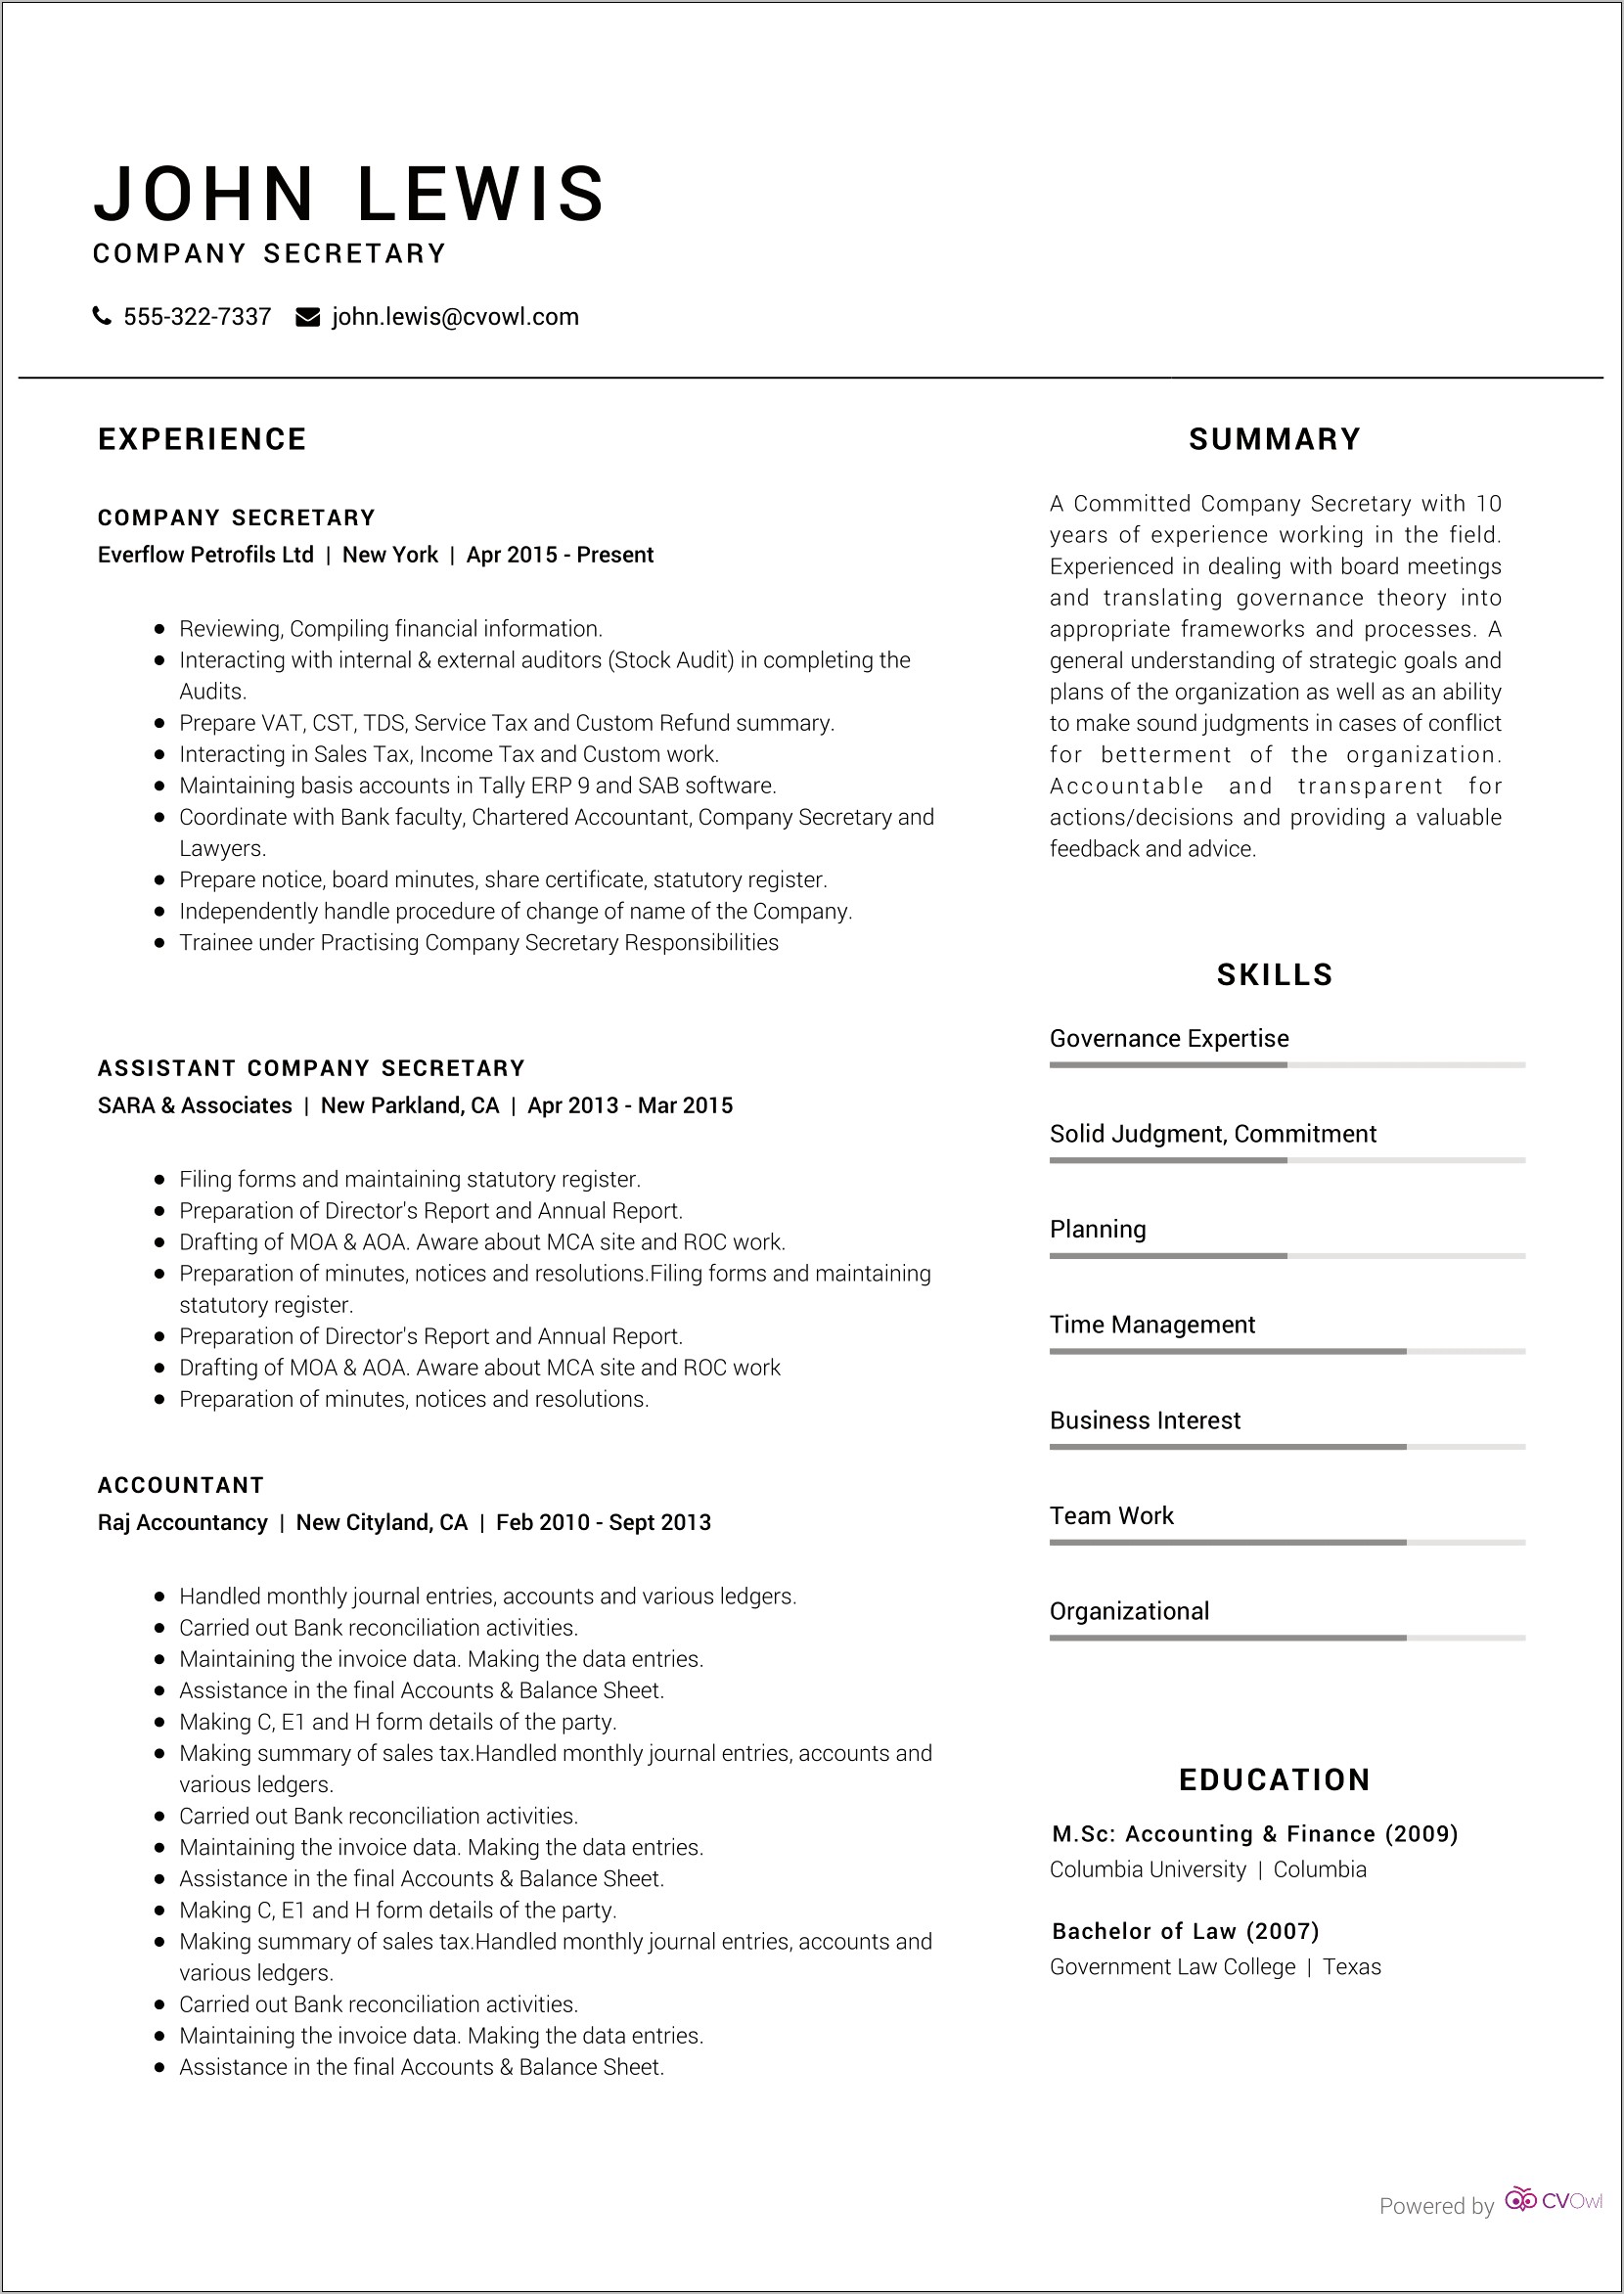 Resume Template Objective Experience Education